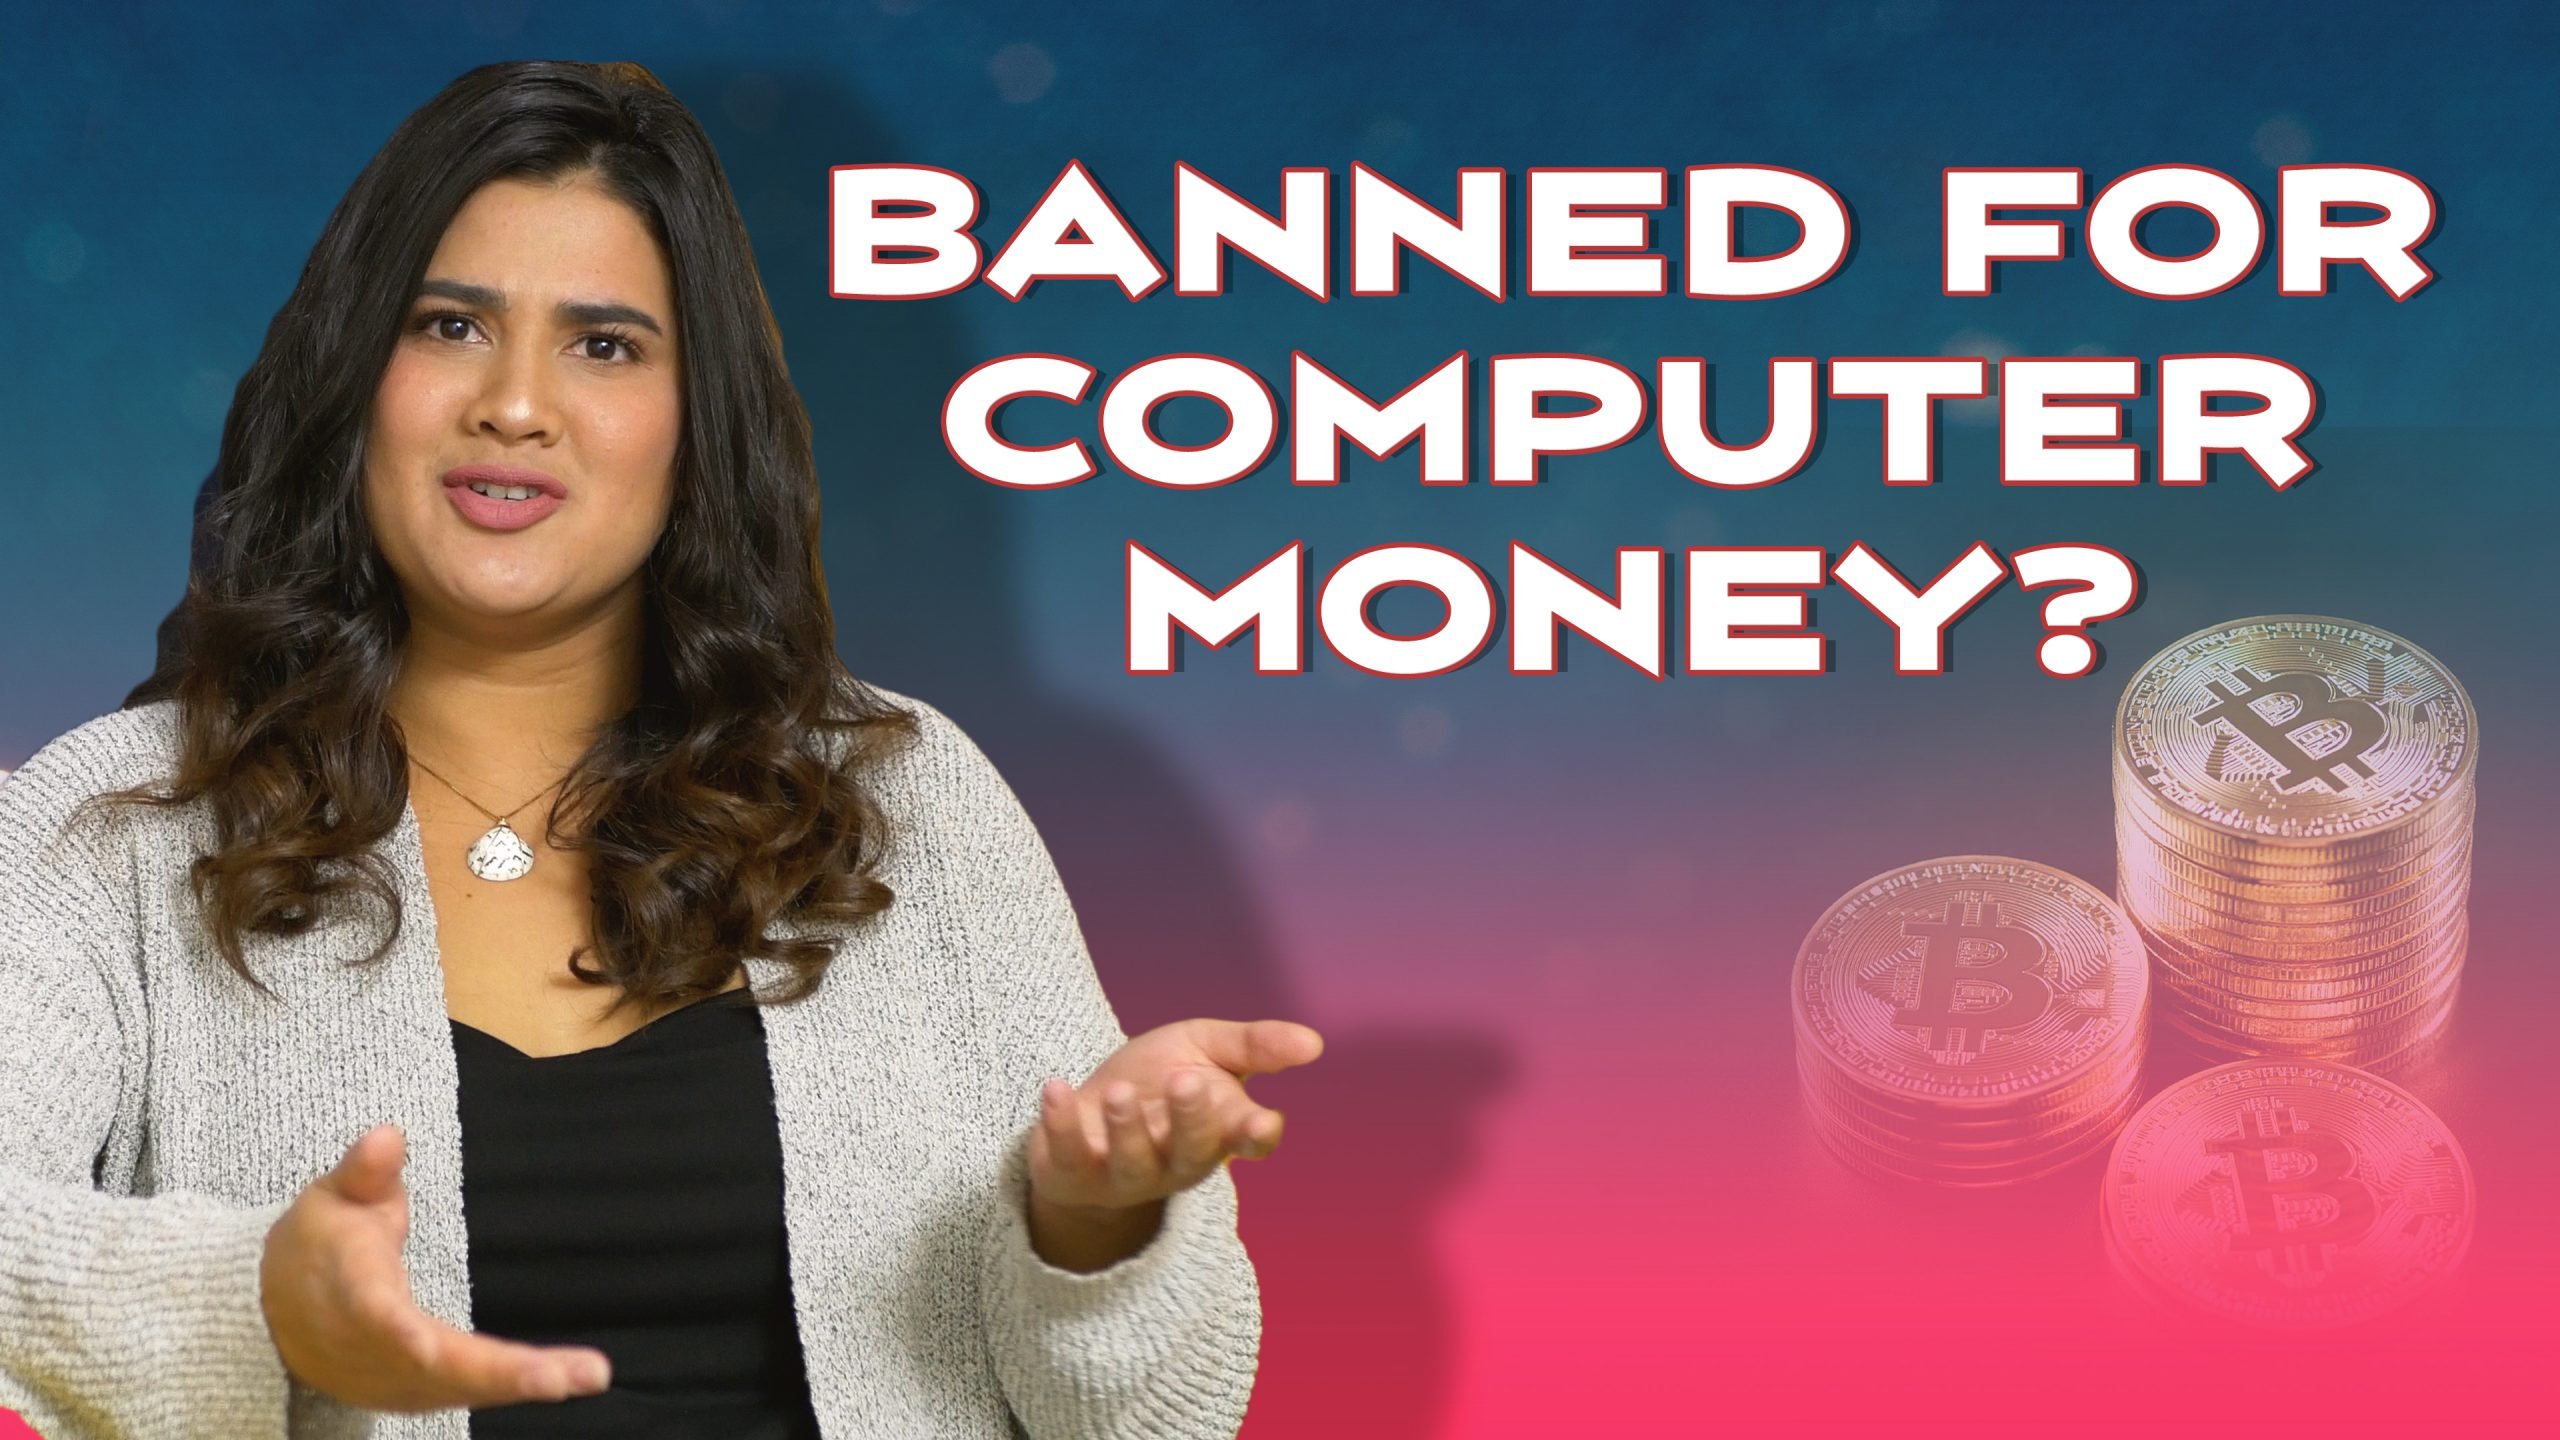 Pullman Marketing - Weekly Social Media Show Tips, Hints, and Weekly News Updates - Banned For Computer Money